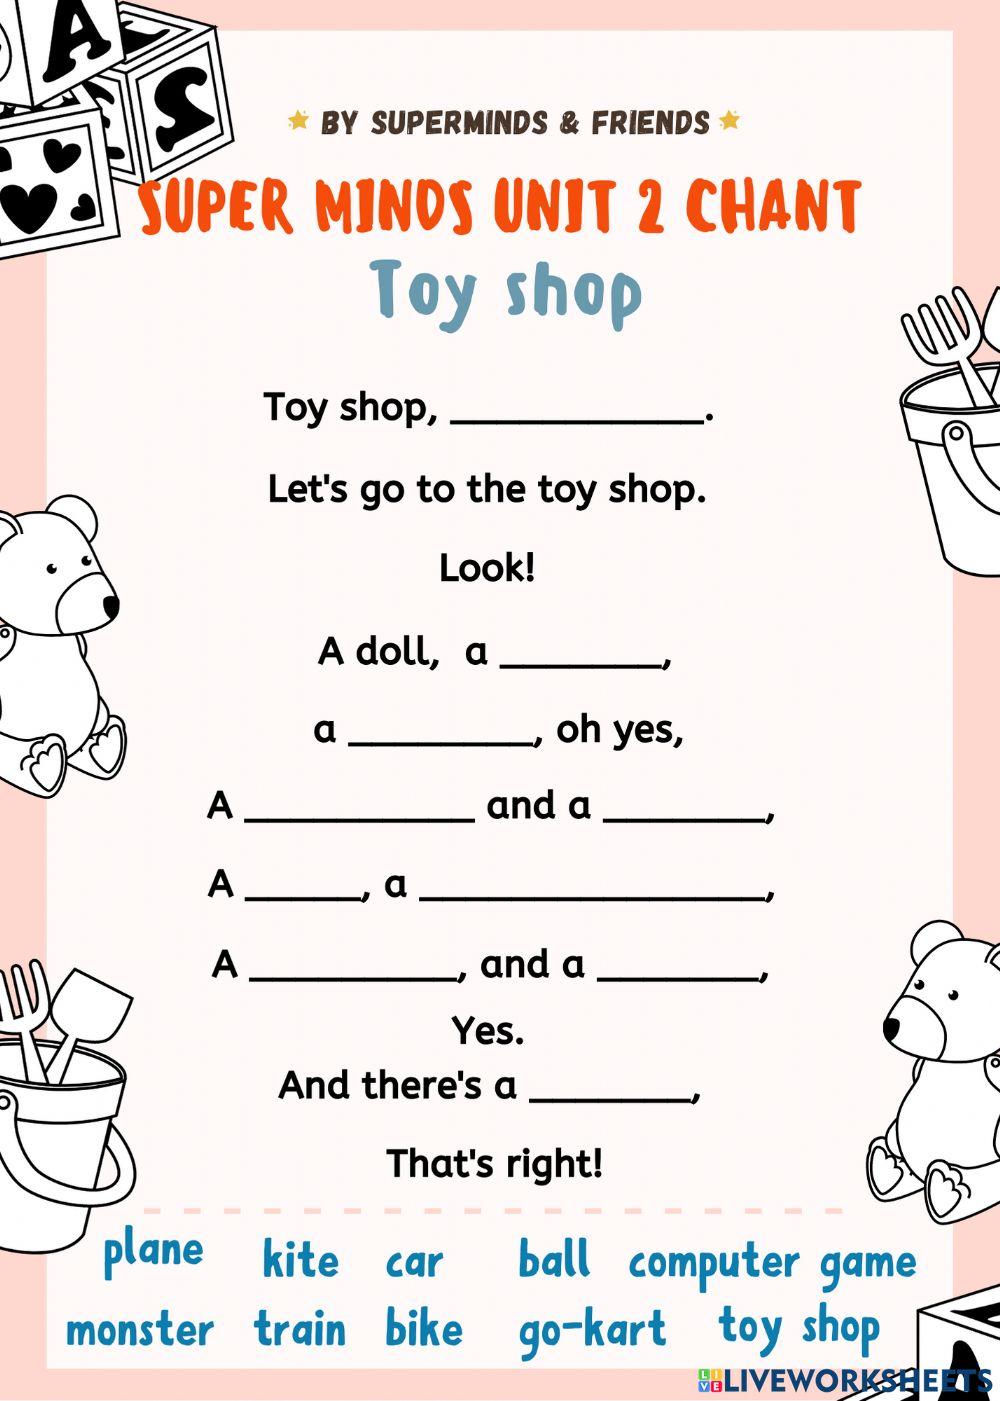 Super Minds Unit 2 Chant Page 22 CD1 Track28 Listen and chant